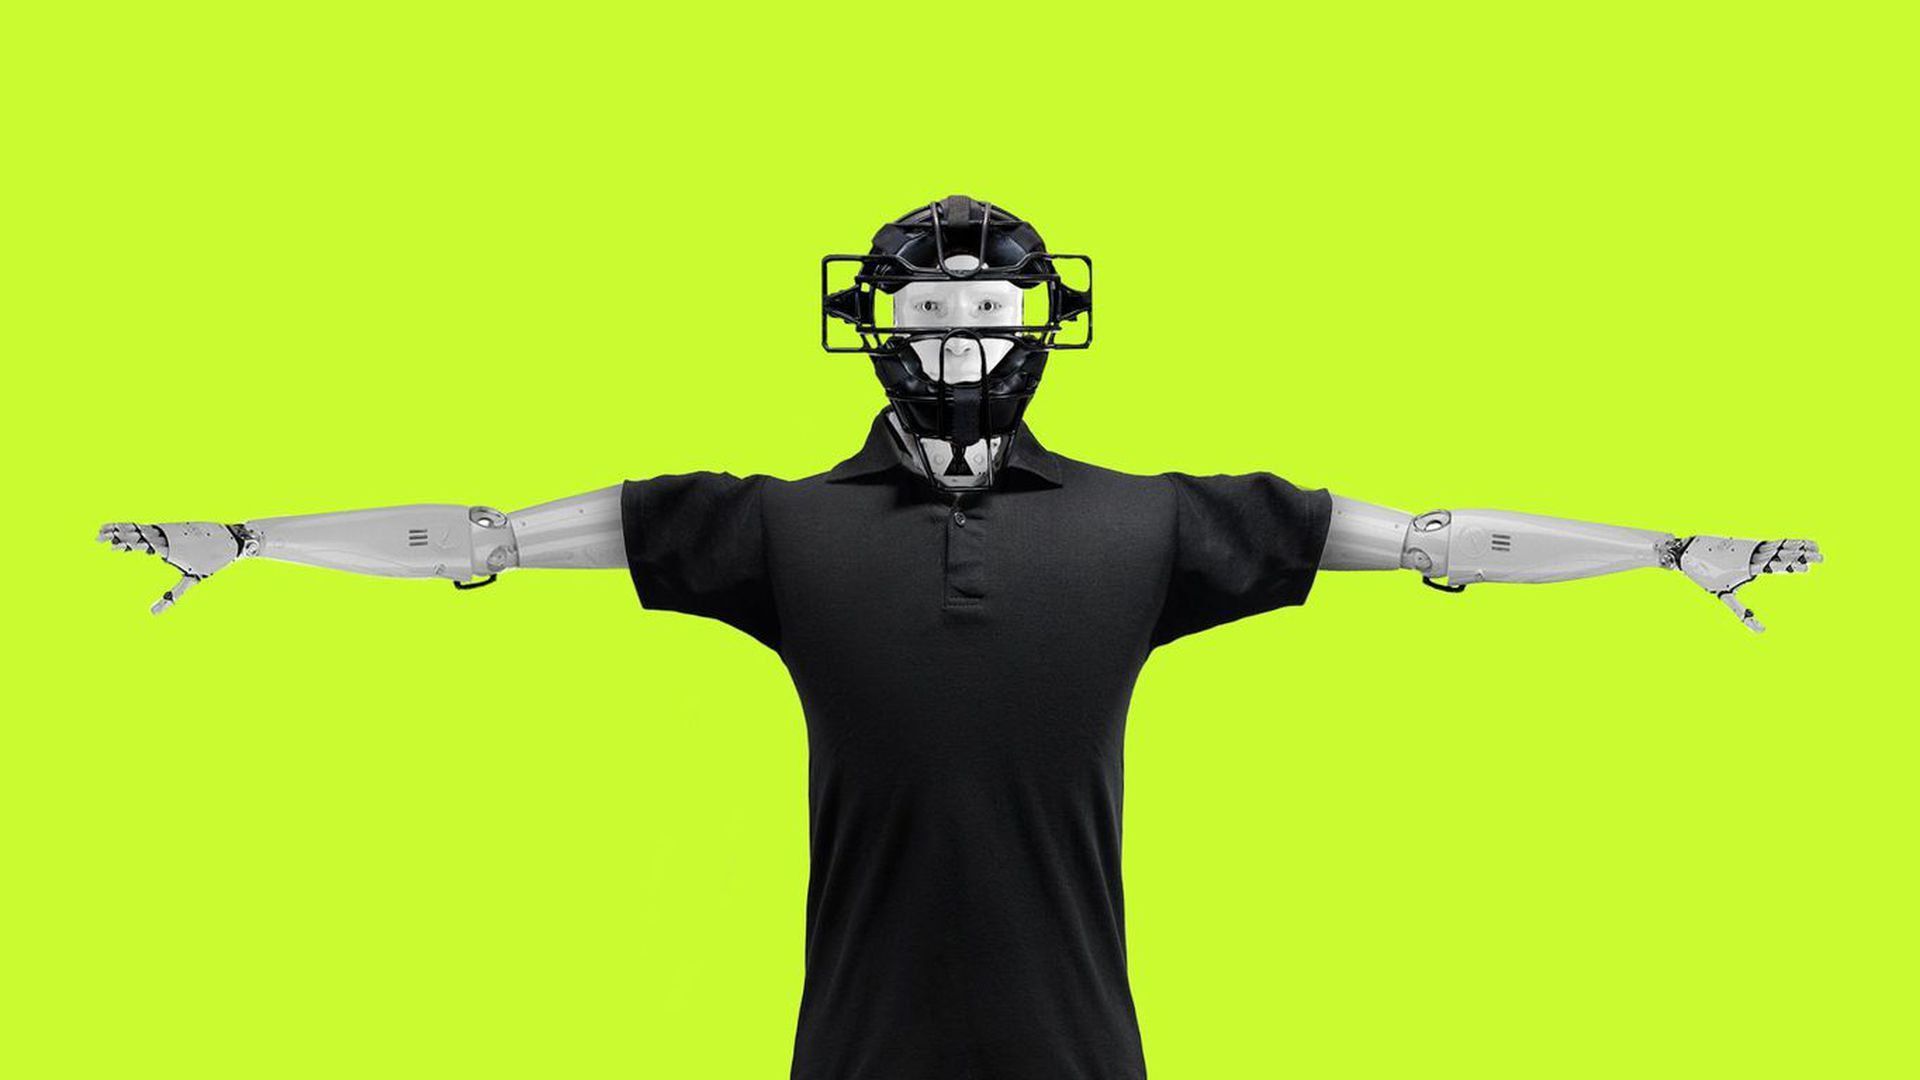 Illustration of a robot wearing an umpire's outfit.